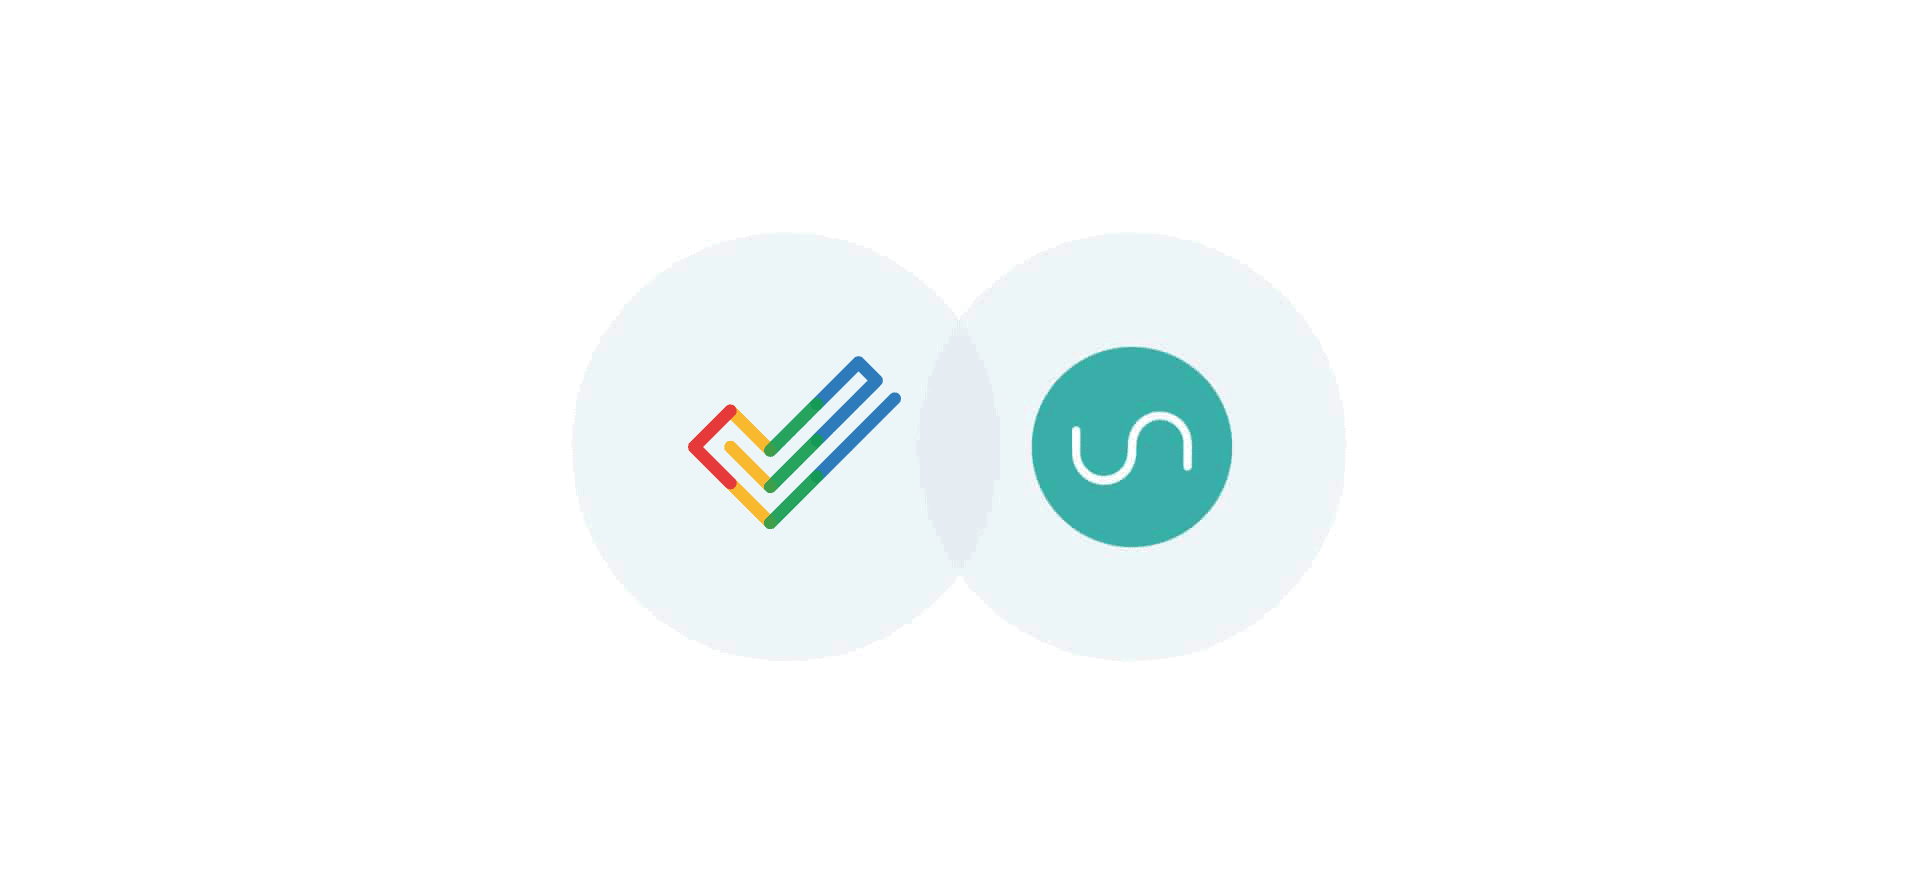 Logos for Zoho Projects and Unito, representing the new Zoho Projects integration